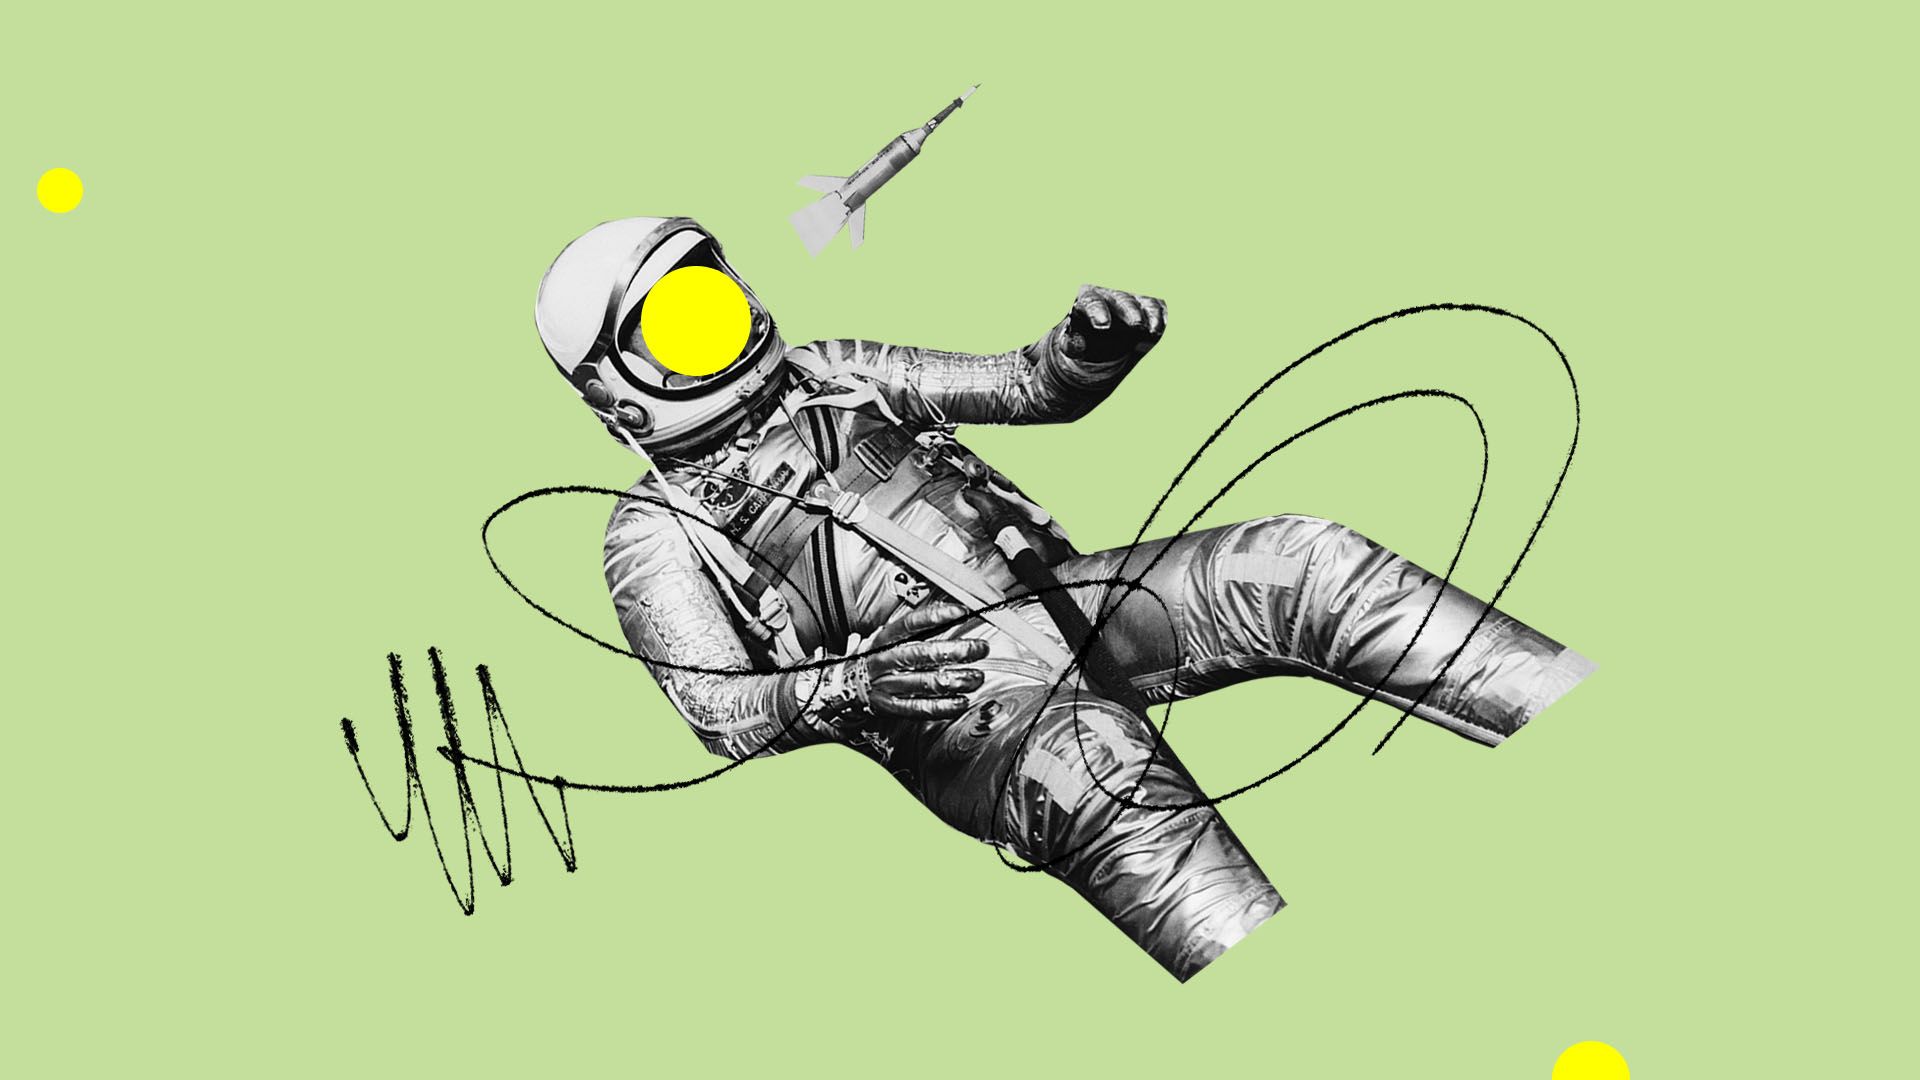 Illustration of astronaut and rocket.